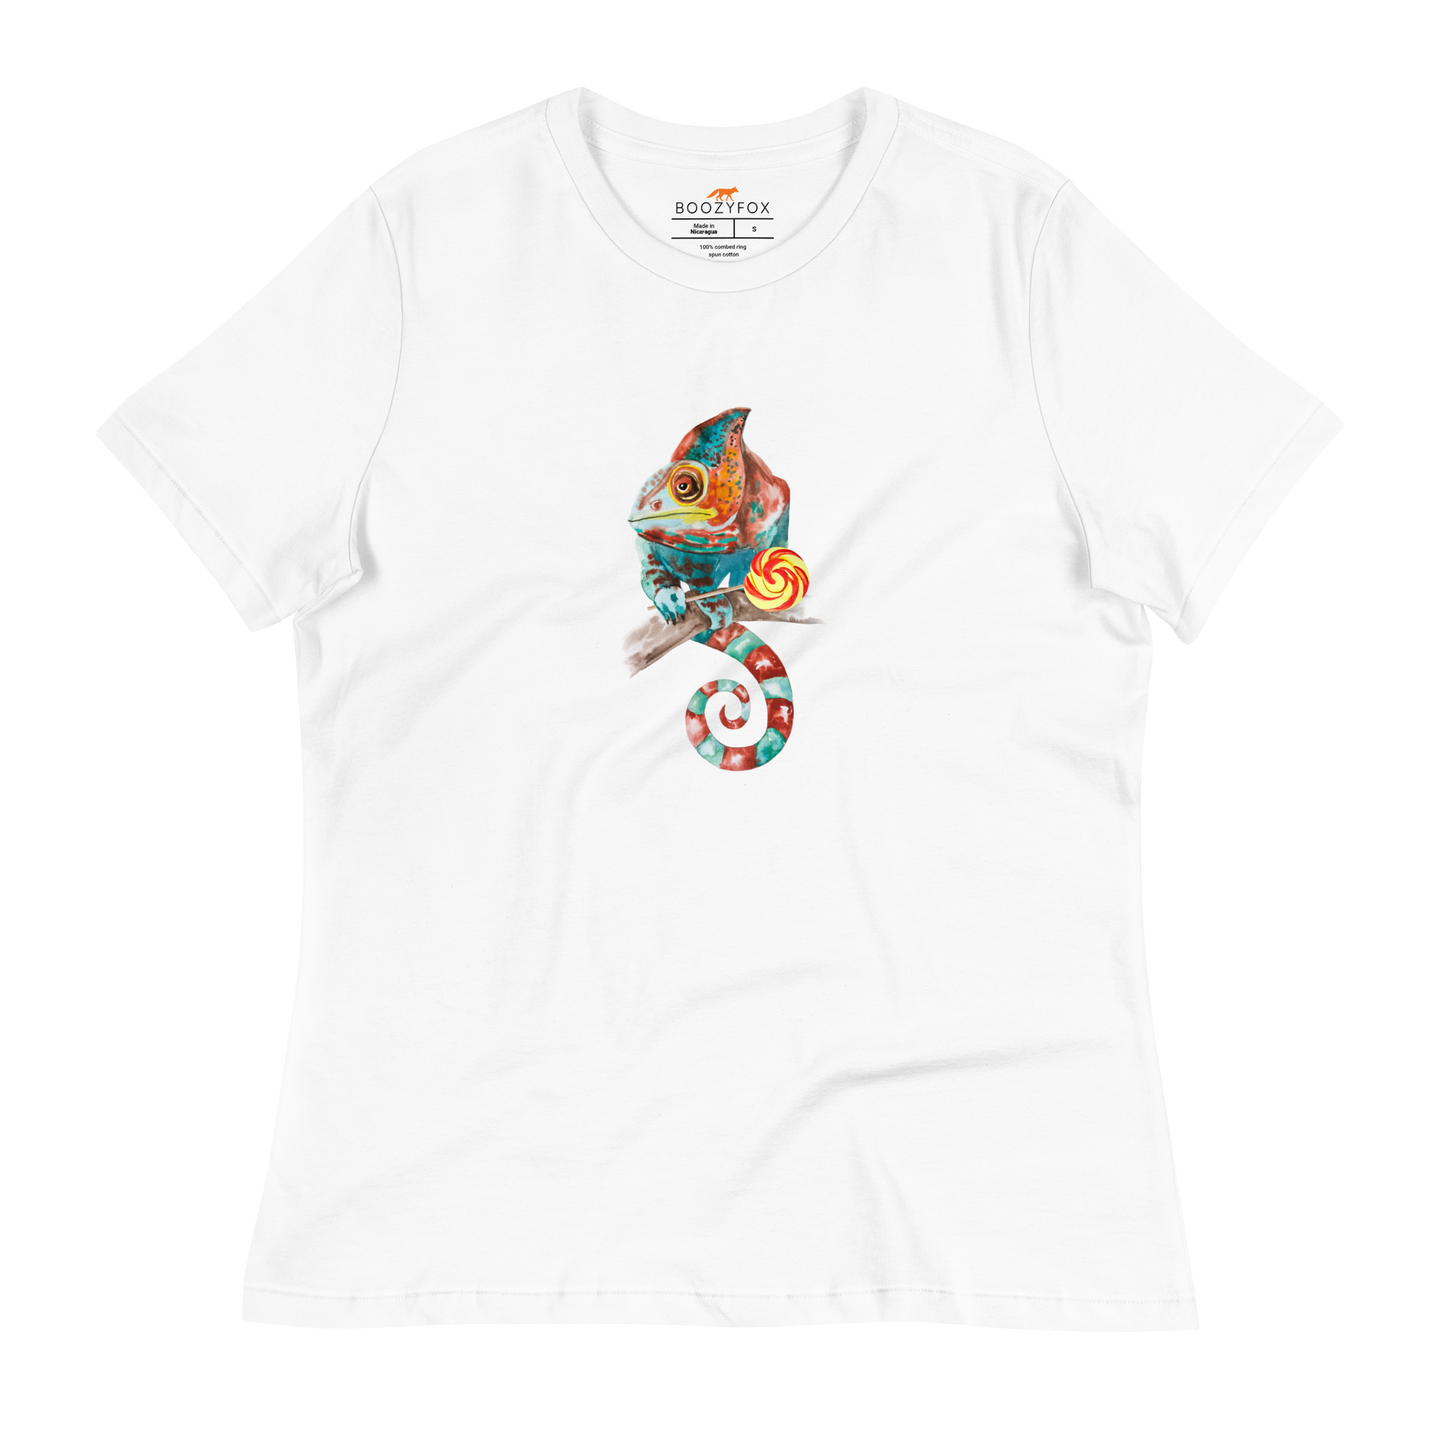 Women's relaxed white Chameleon t-shirt featuring a colorful Chameleon With A Lollipop graphic on the chest - Women's Graphic Chameleon Tees - Boozy Fox